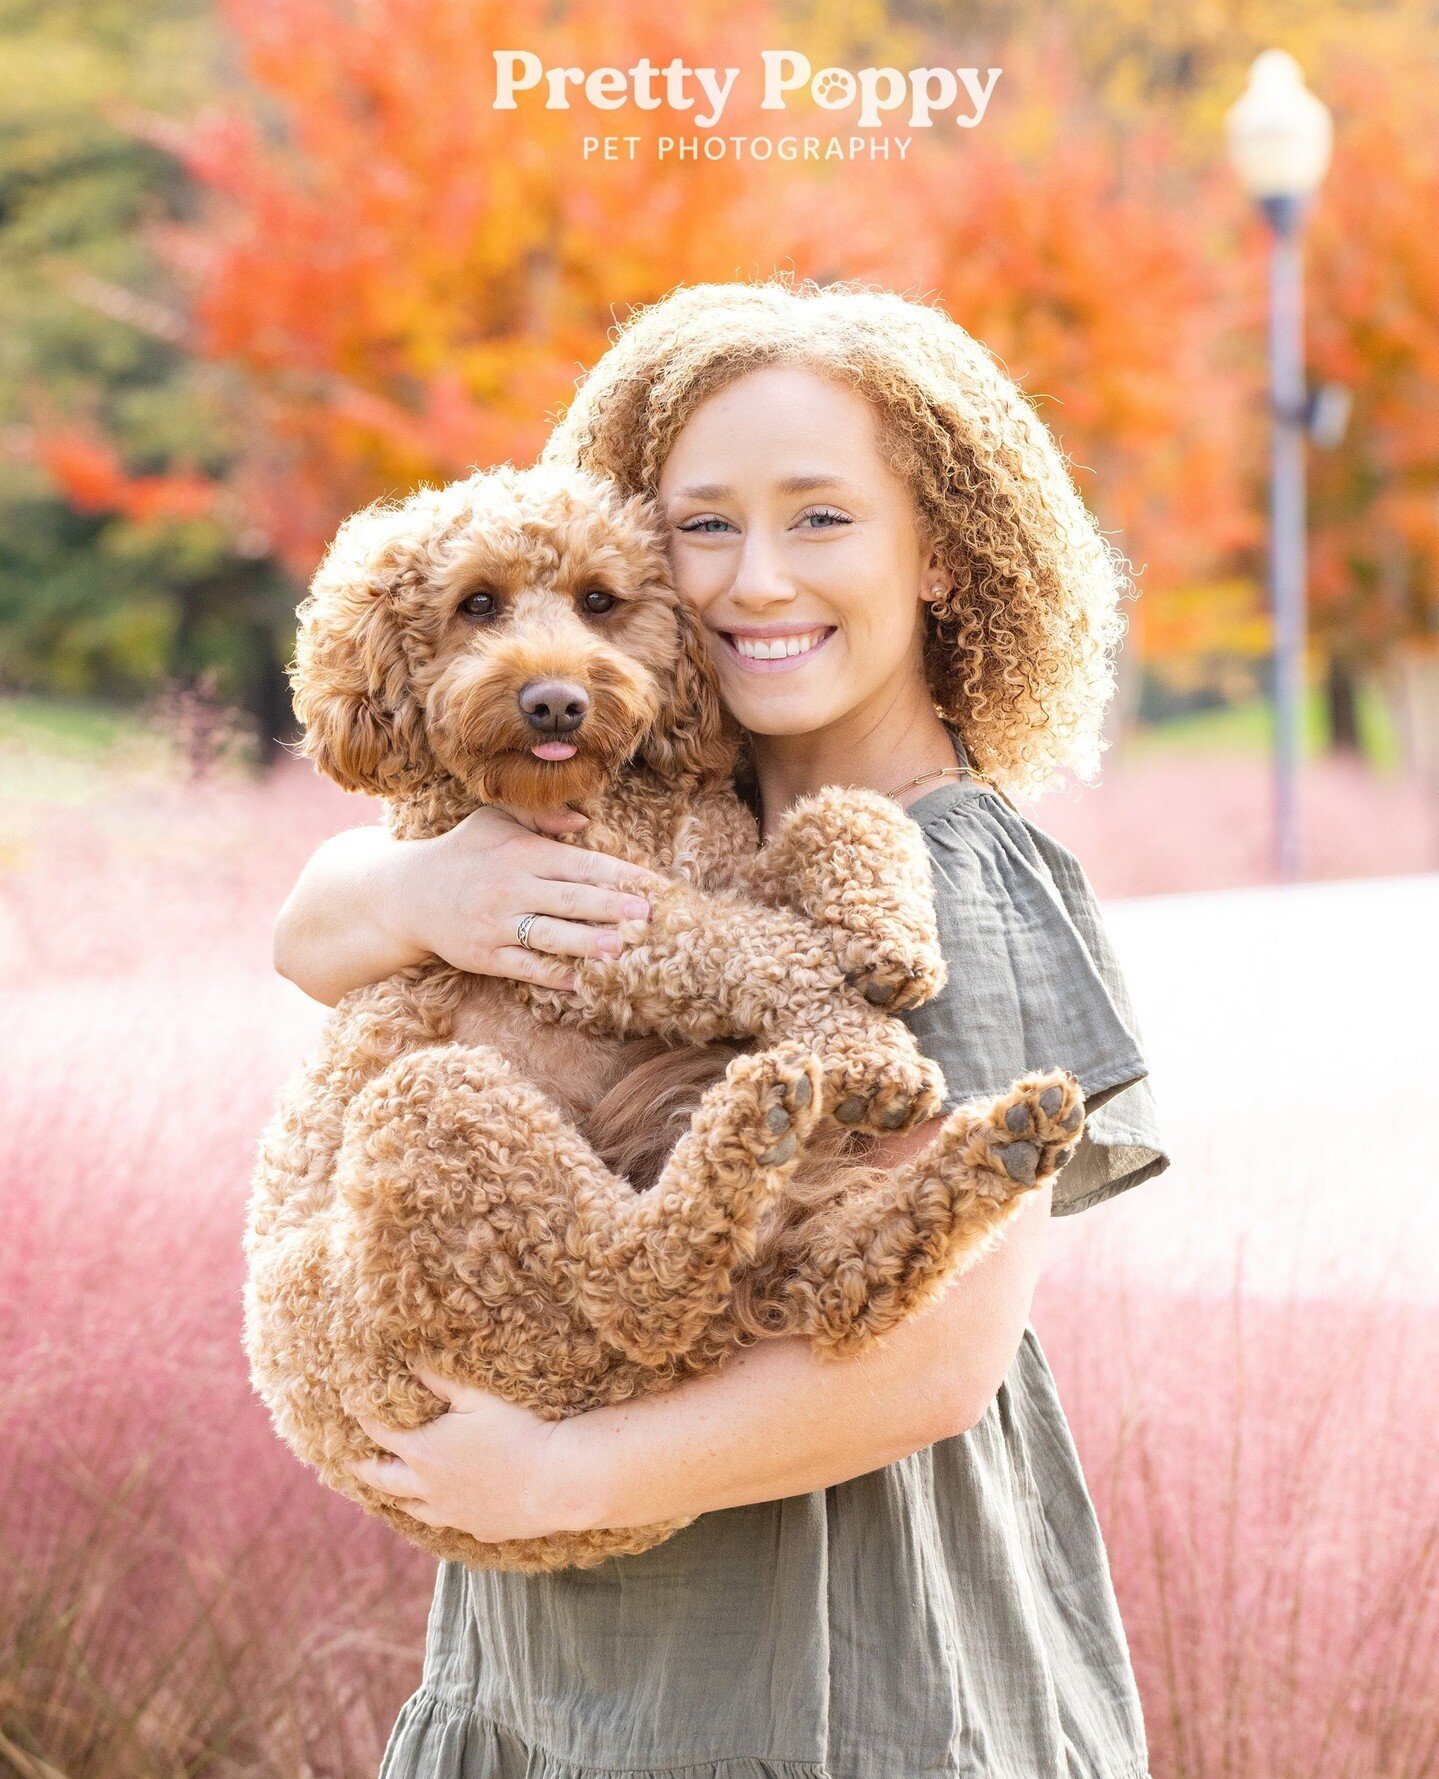 Rusty's photo session occurred on a beautiful autumn day where we embraced the vivid colors of the season and looked for the best backdrops.